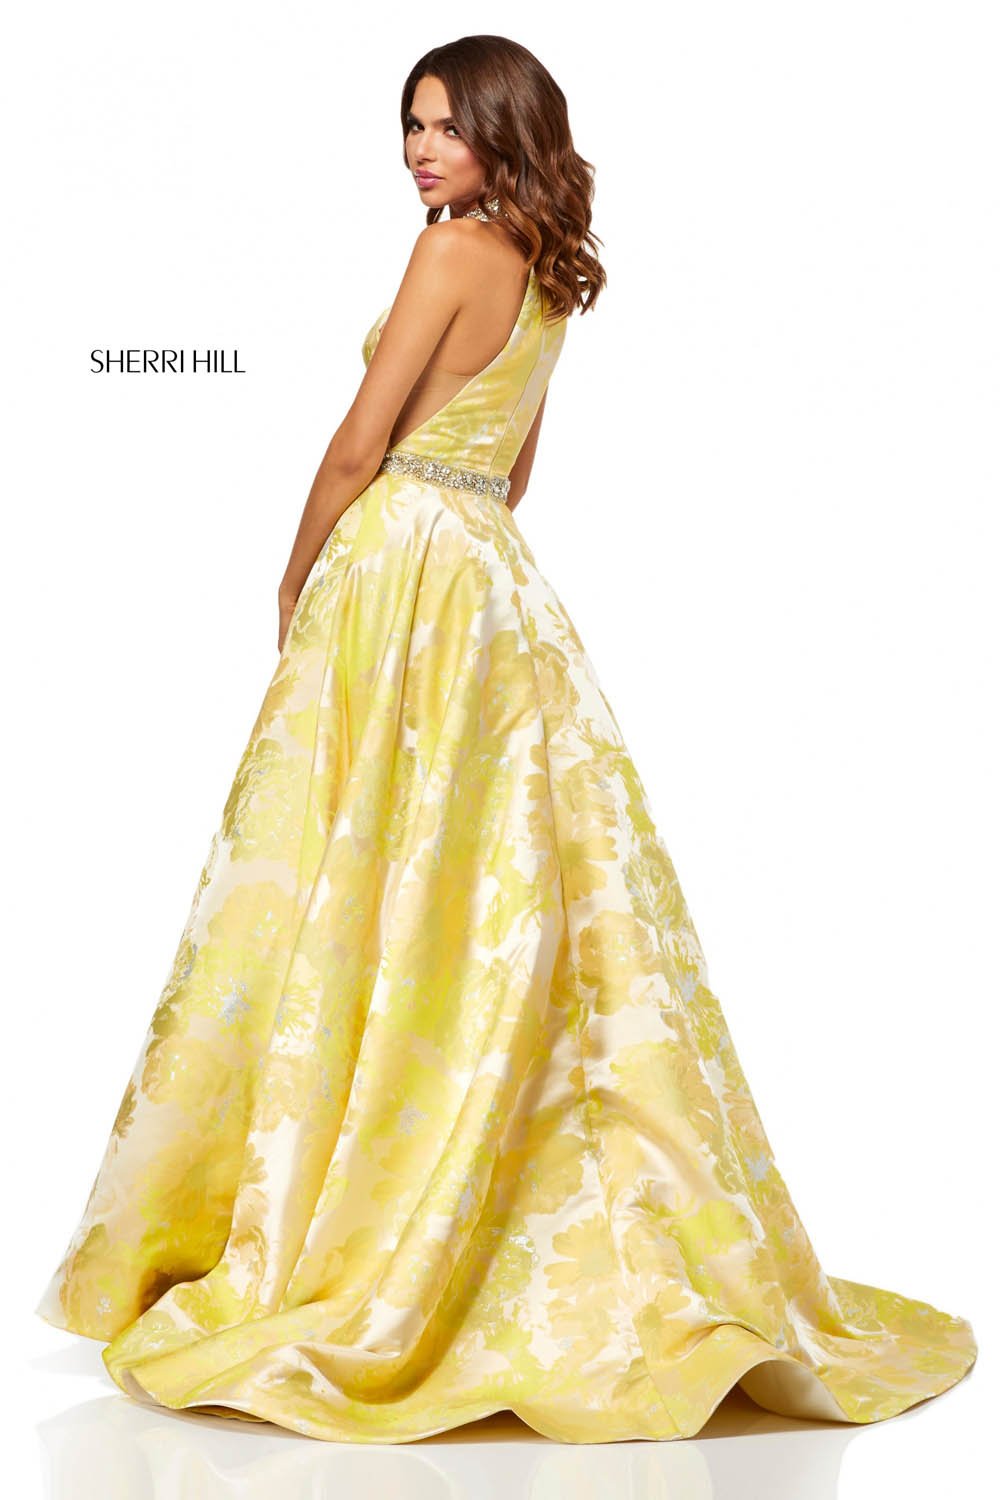 Sherri Hill 52425 dress images in these colors: Yellow Print.